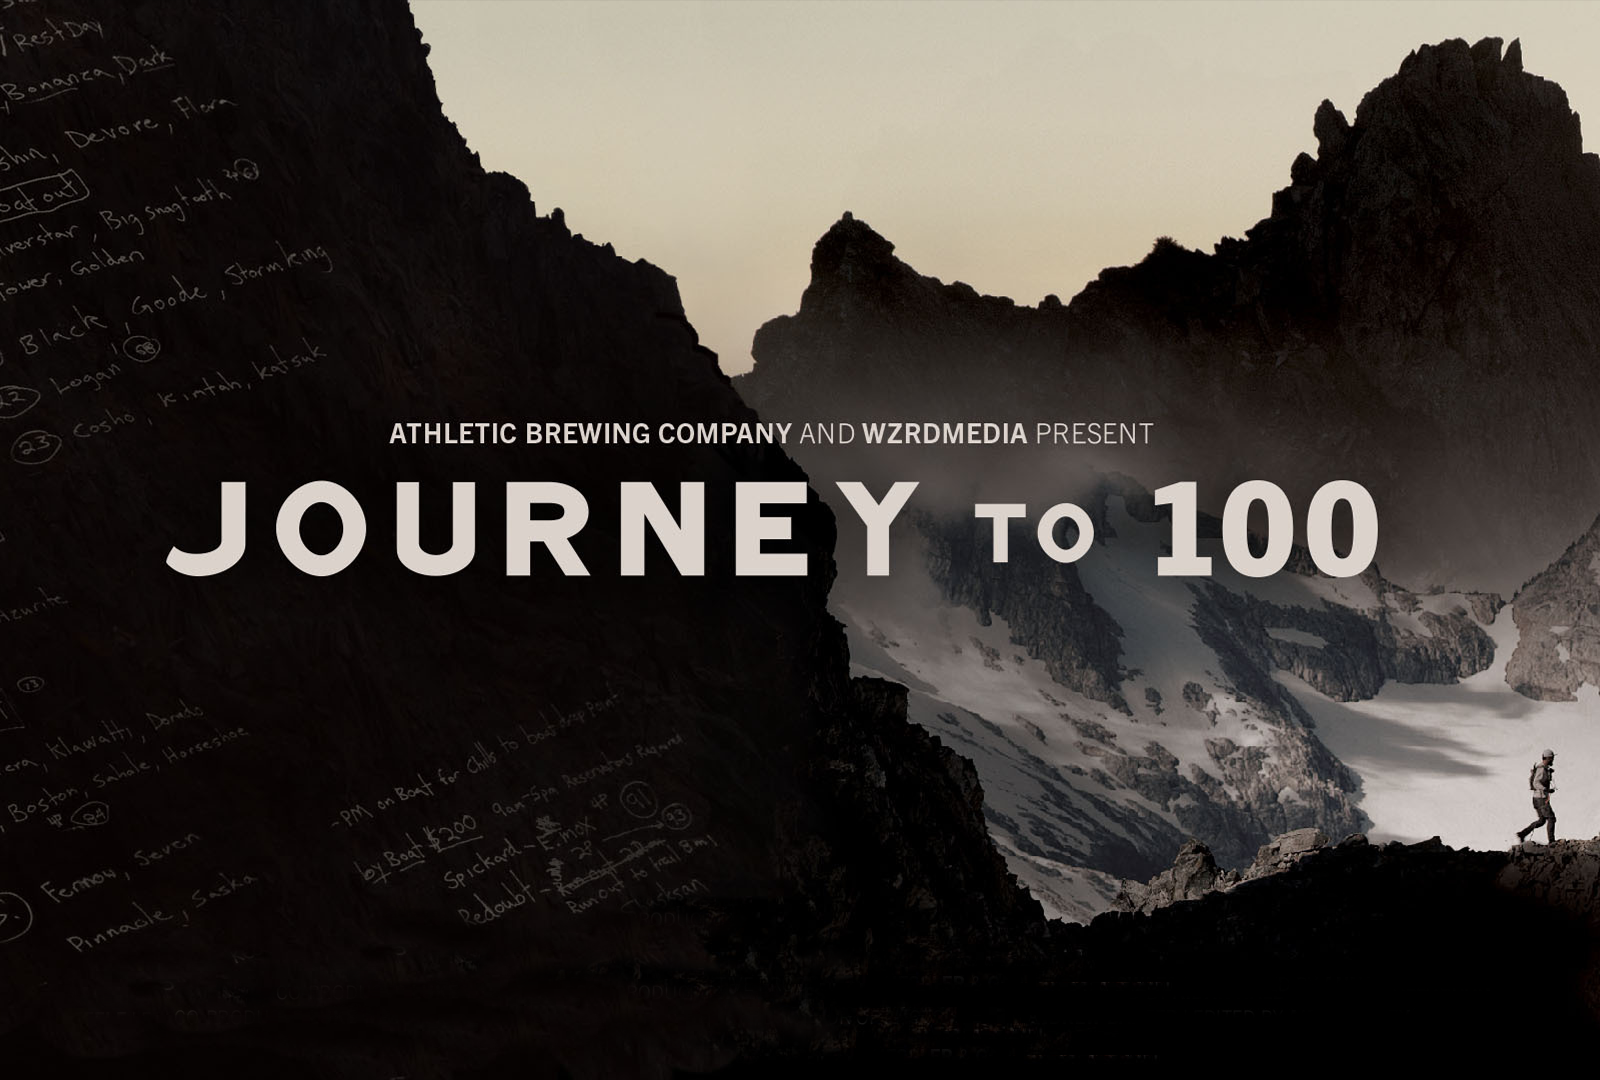 Reel image for Journey to 100